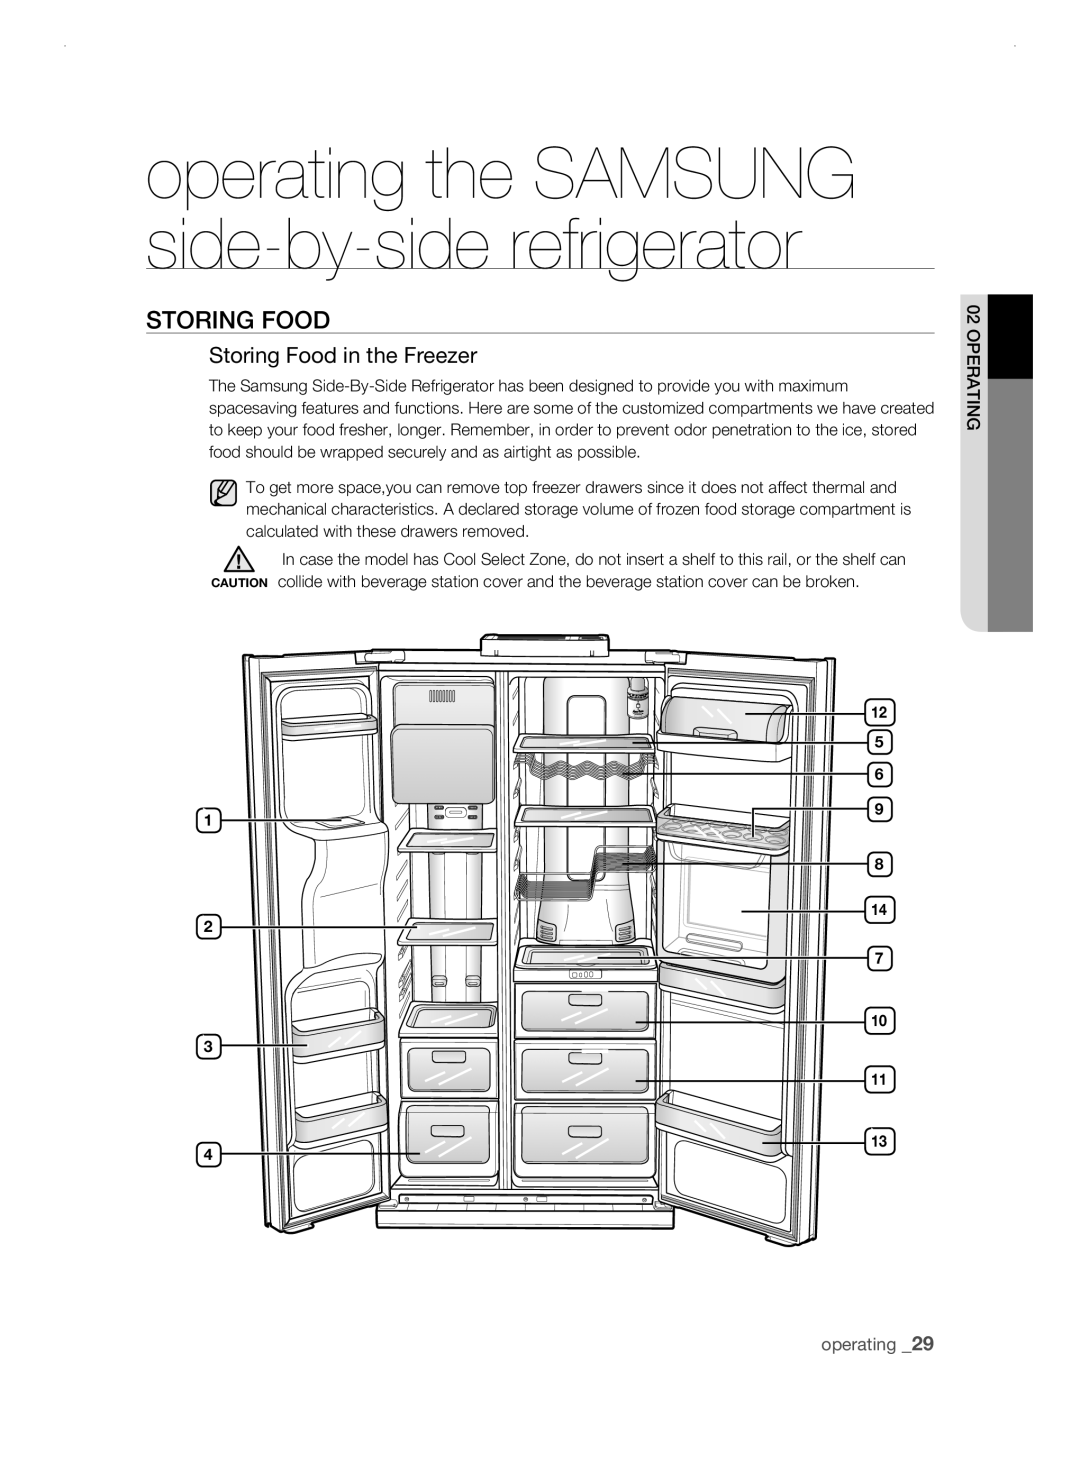 Samsung RSH3F, RSH3N, RSH3D storing fooD, Storing Food in the Freezer, operating the SAMSUNG side-by-side refrigerator 